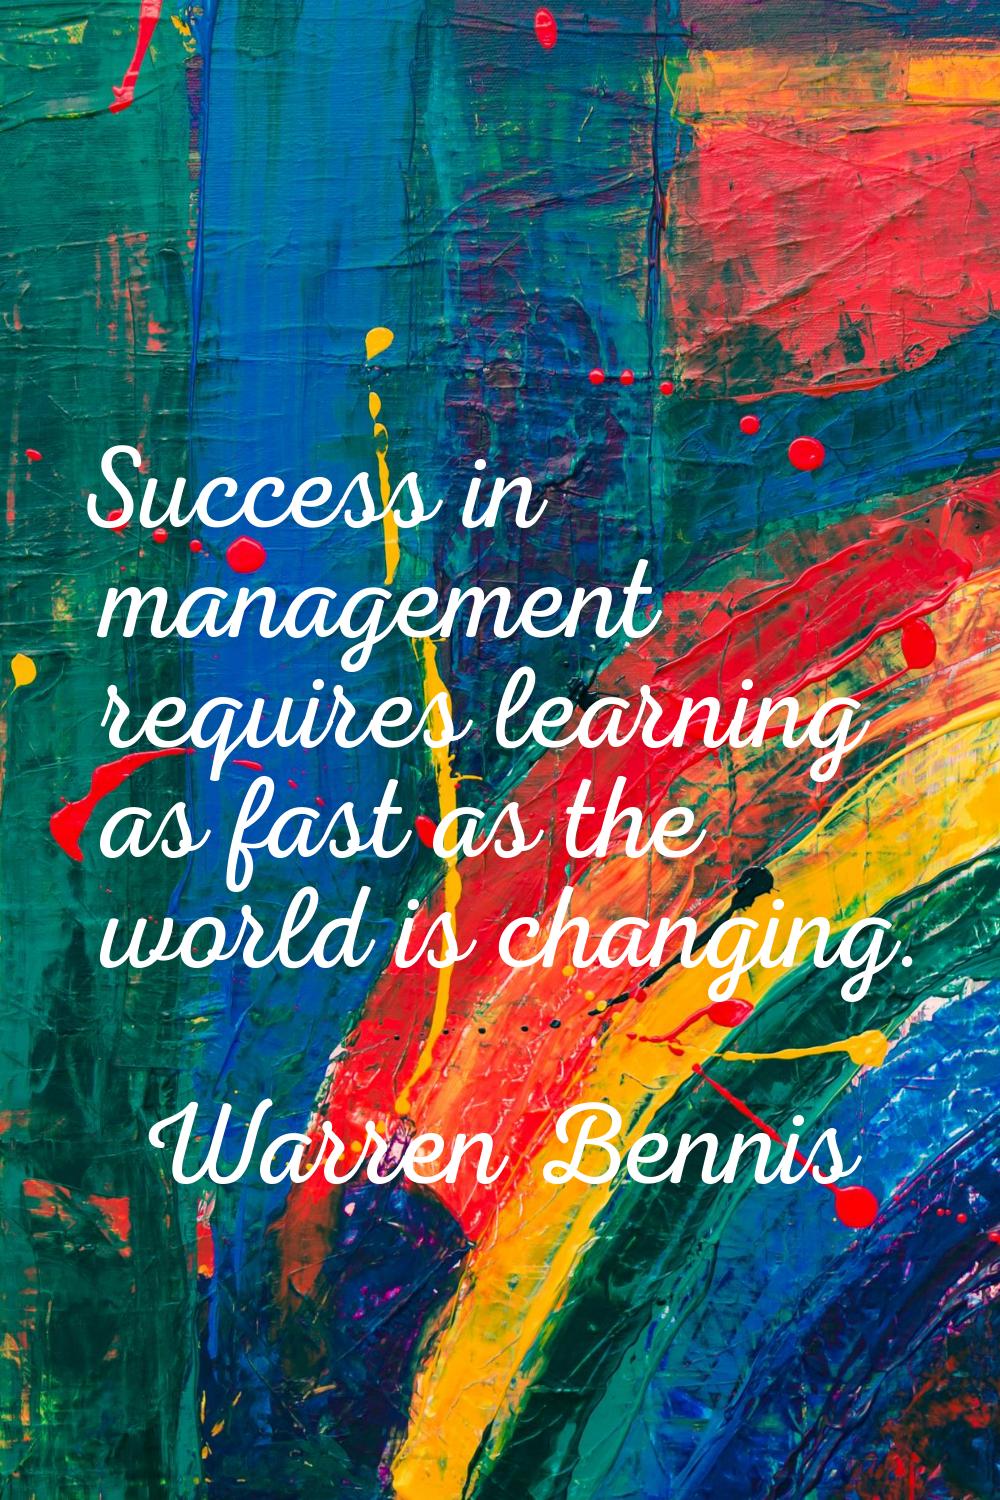 Success in management requires learning as fast as the world is changing.